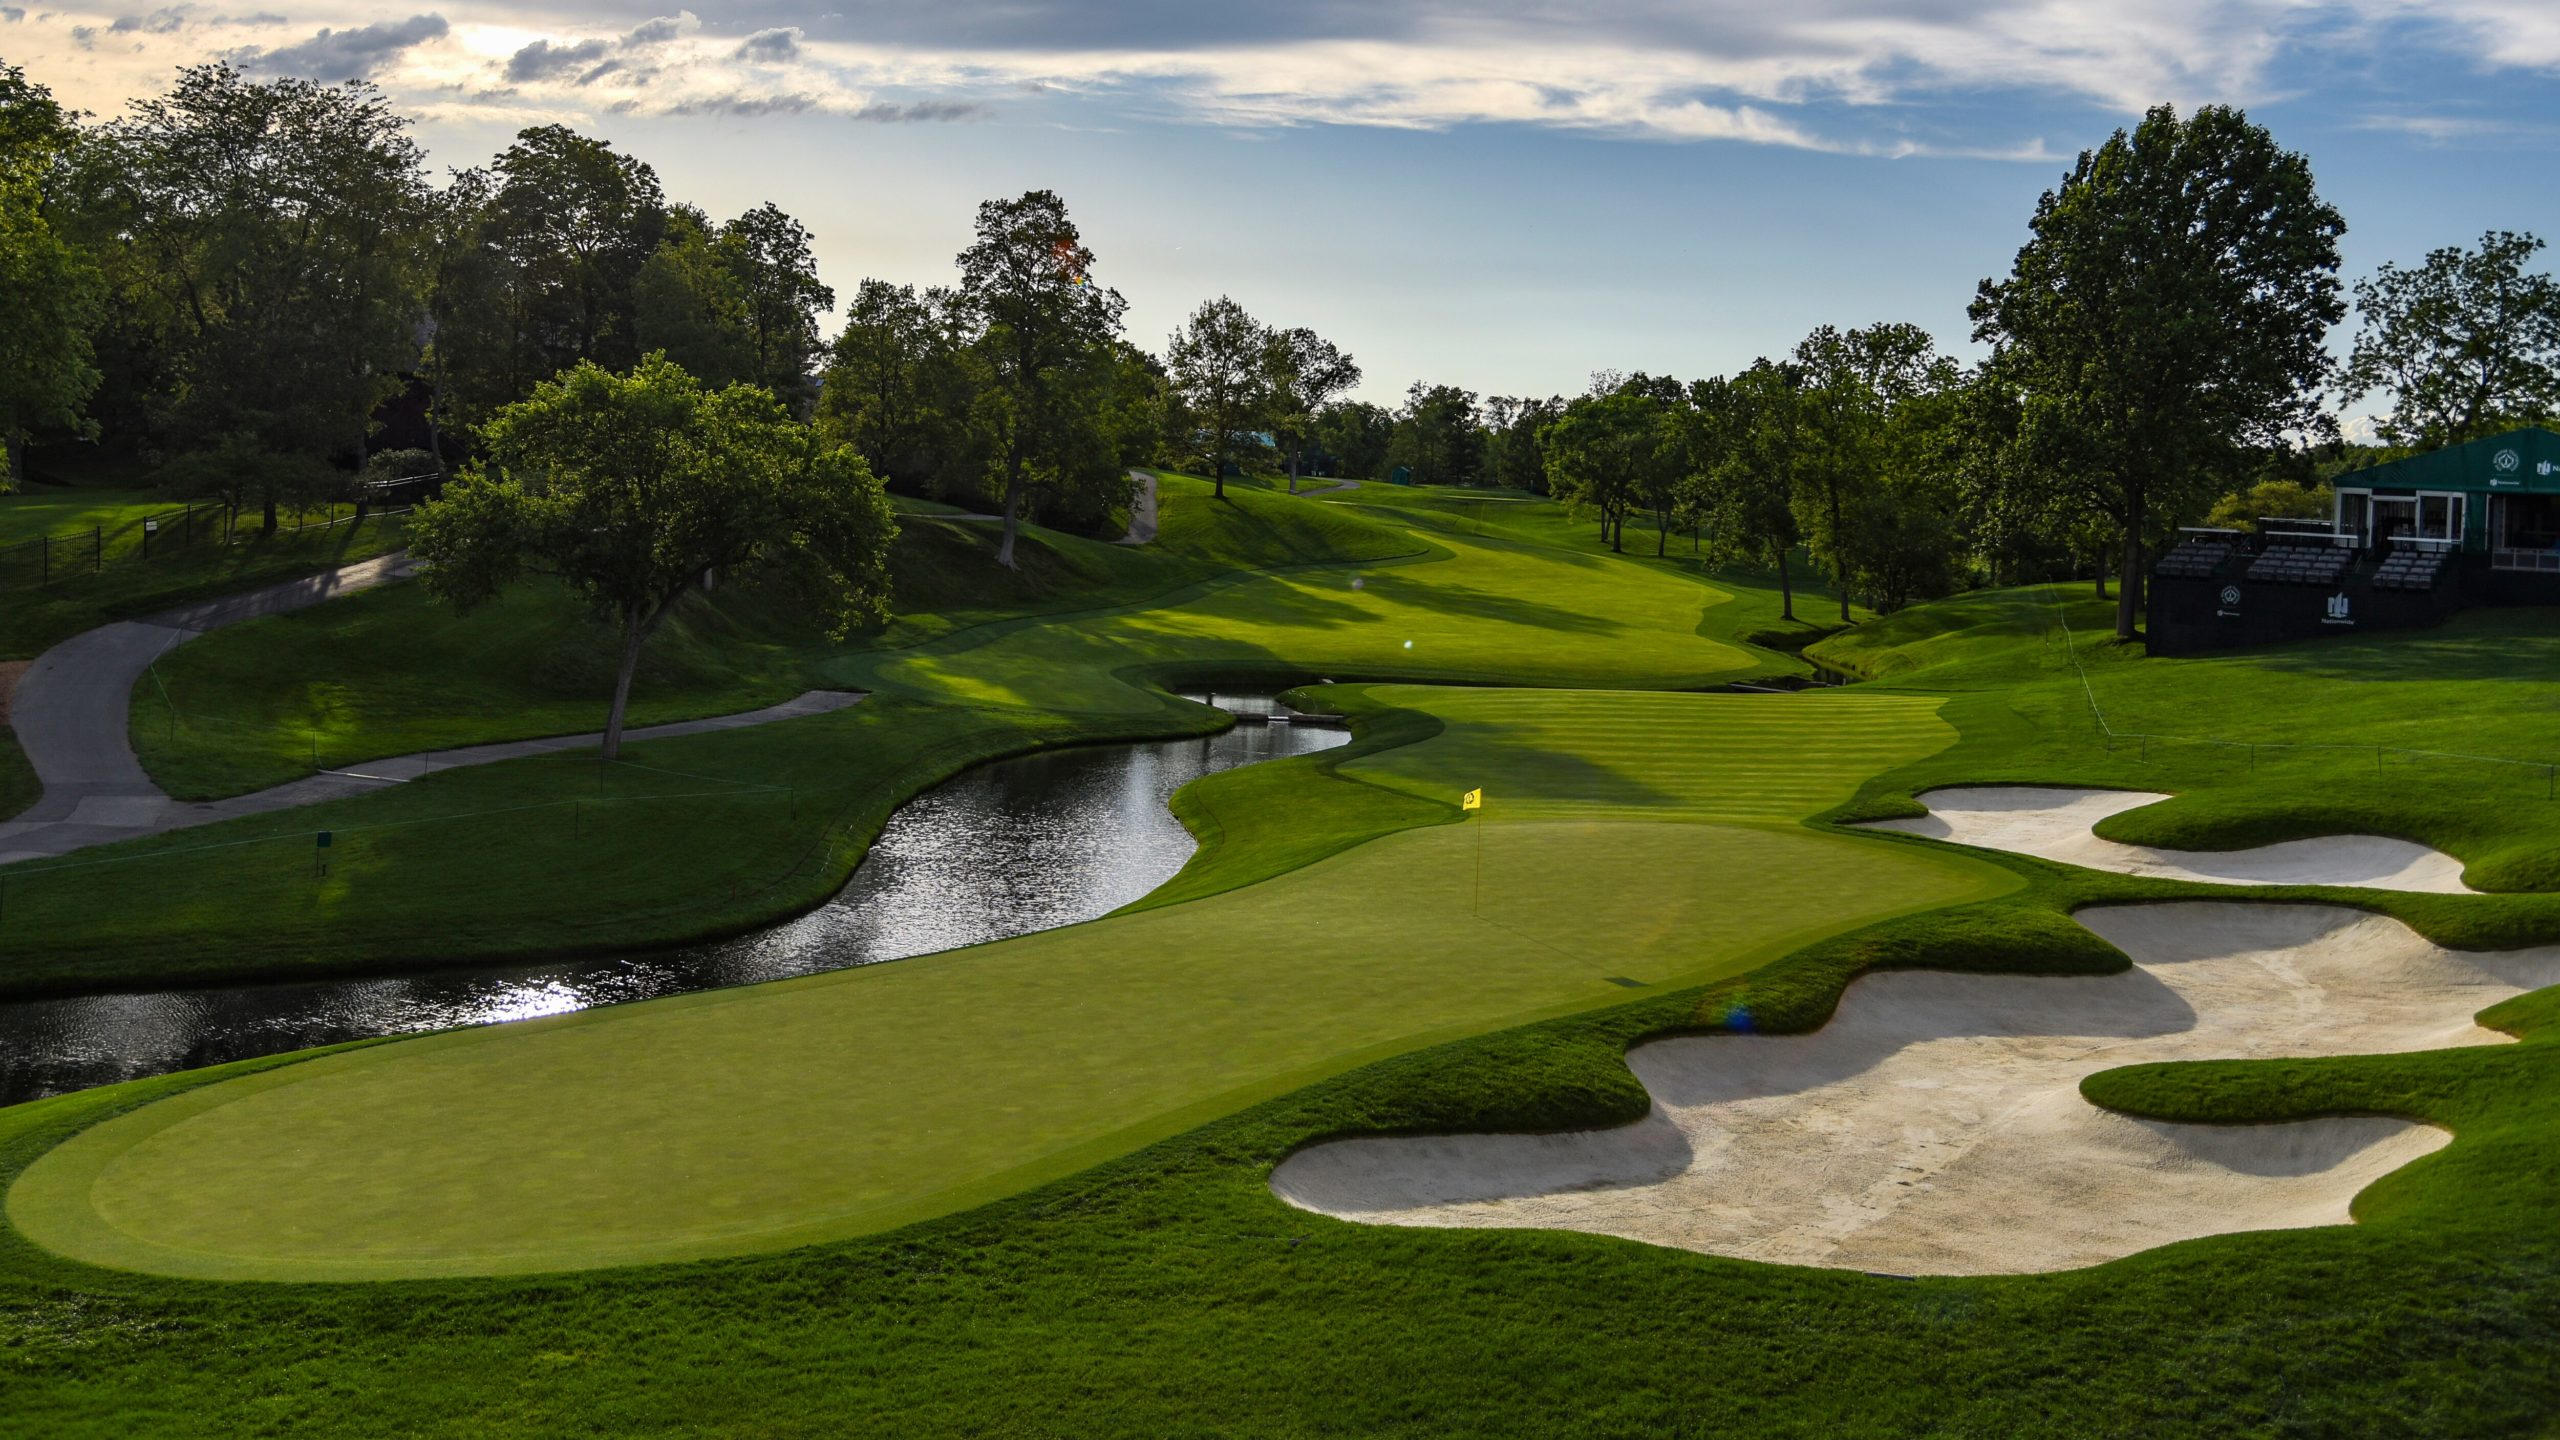 Two different events at Muirfield Village will feature two different setups